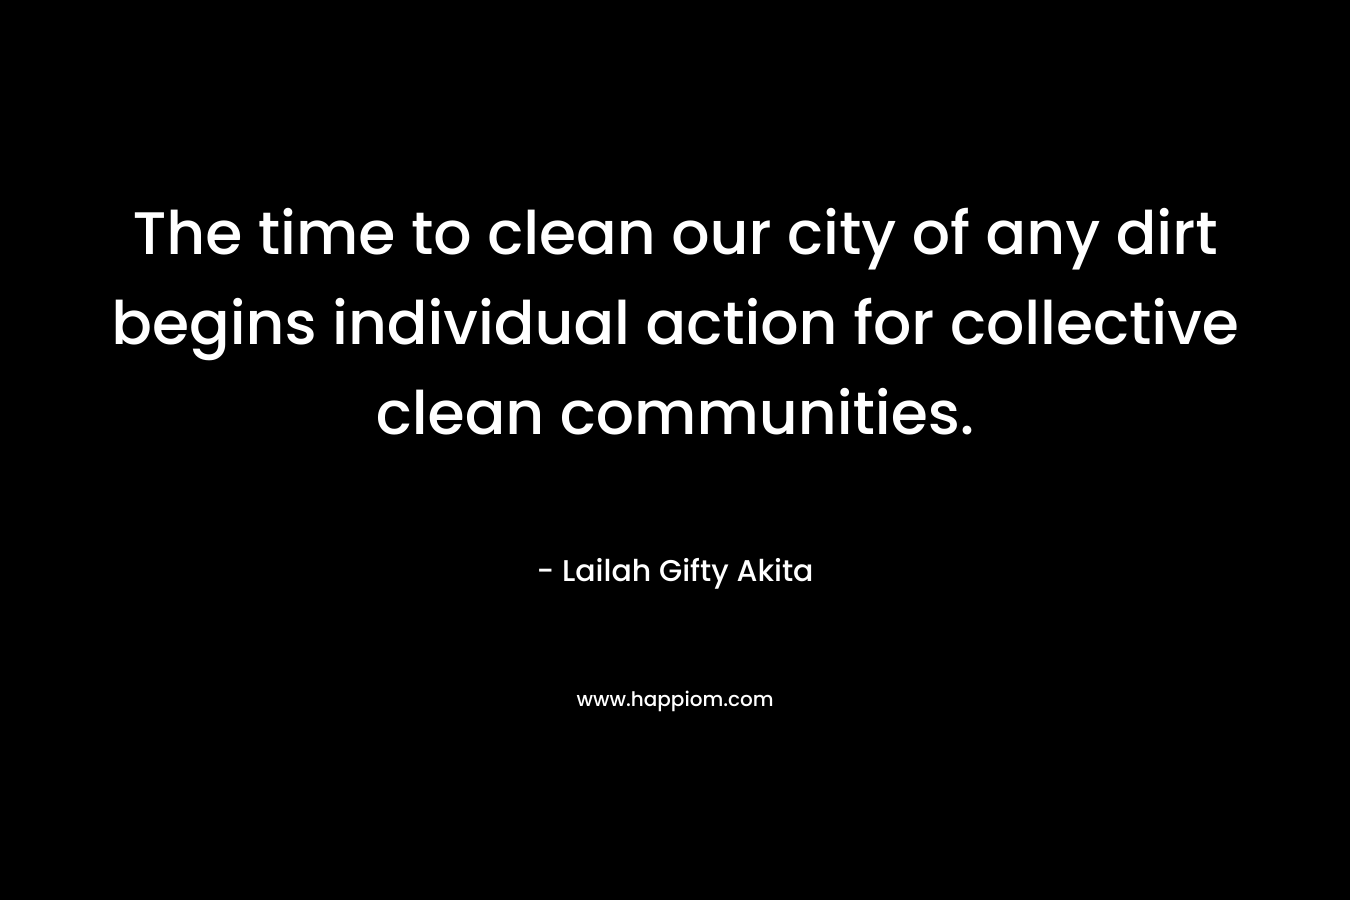 The time to clean our city of any dirt begins individual action for collective clean communities.